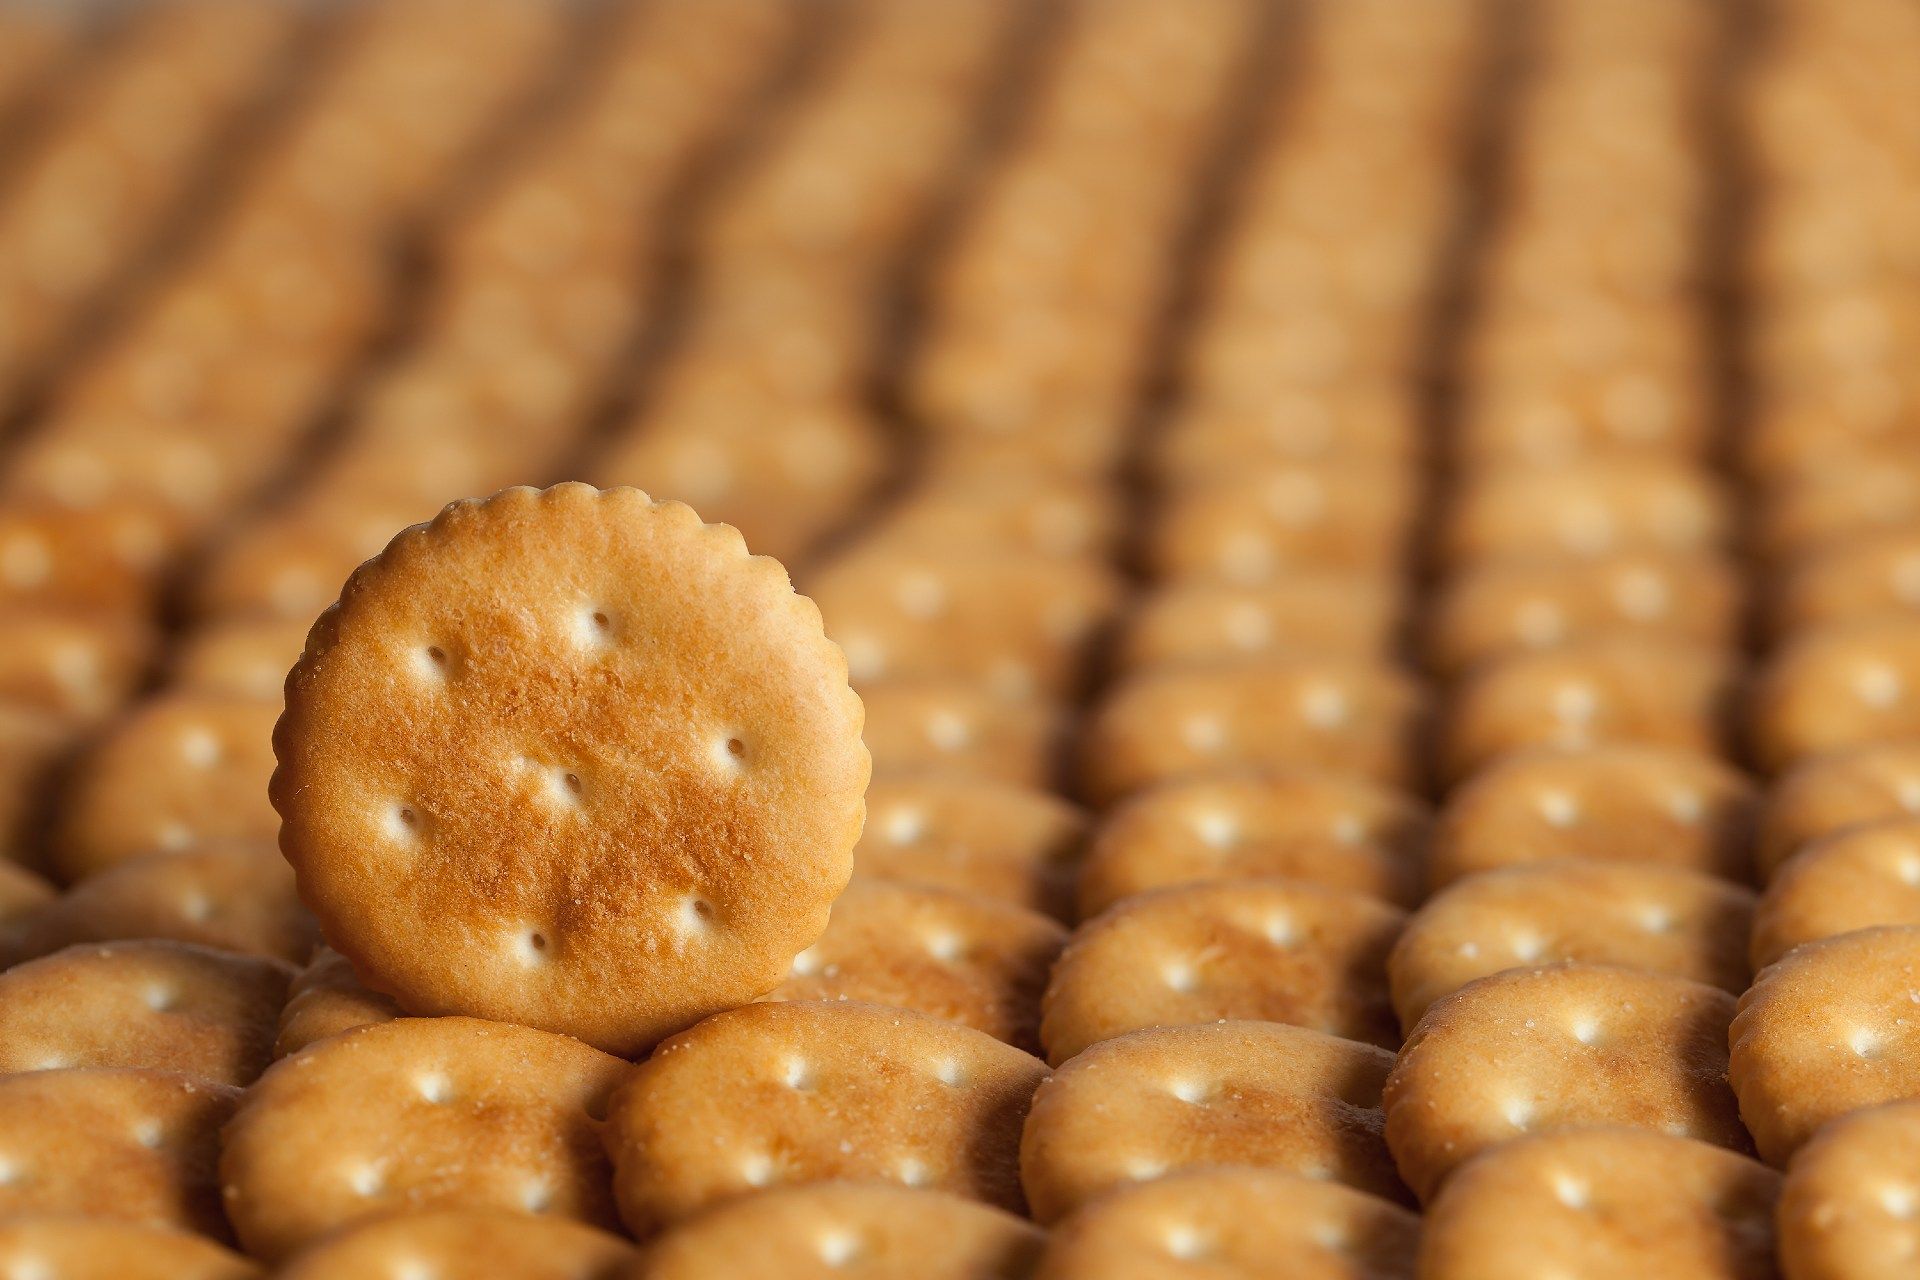 One circular cracker stands on end among rows of circular crackers lying flat - Pepperidge Farm Golden Butter Crackers